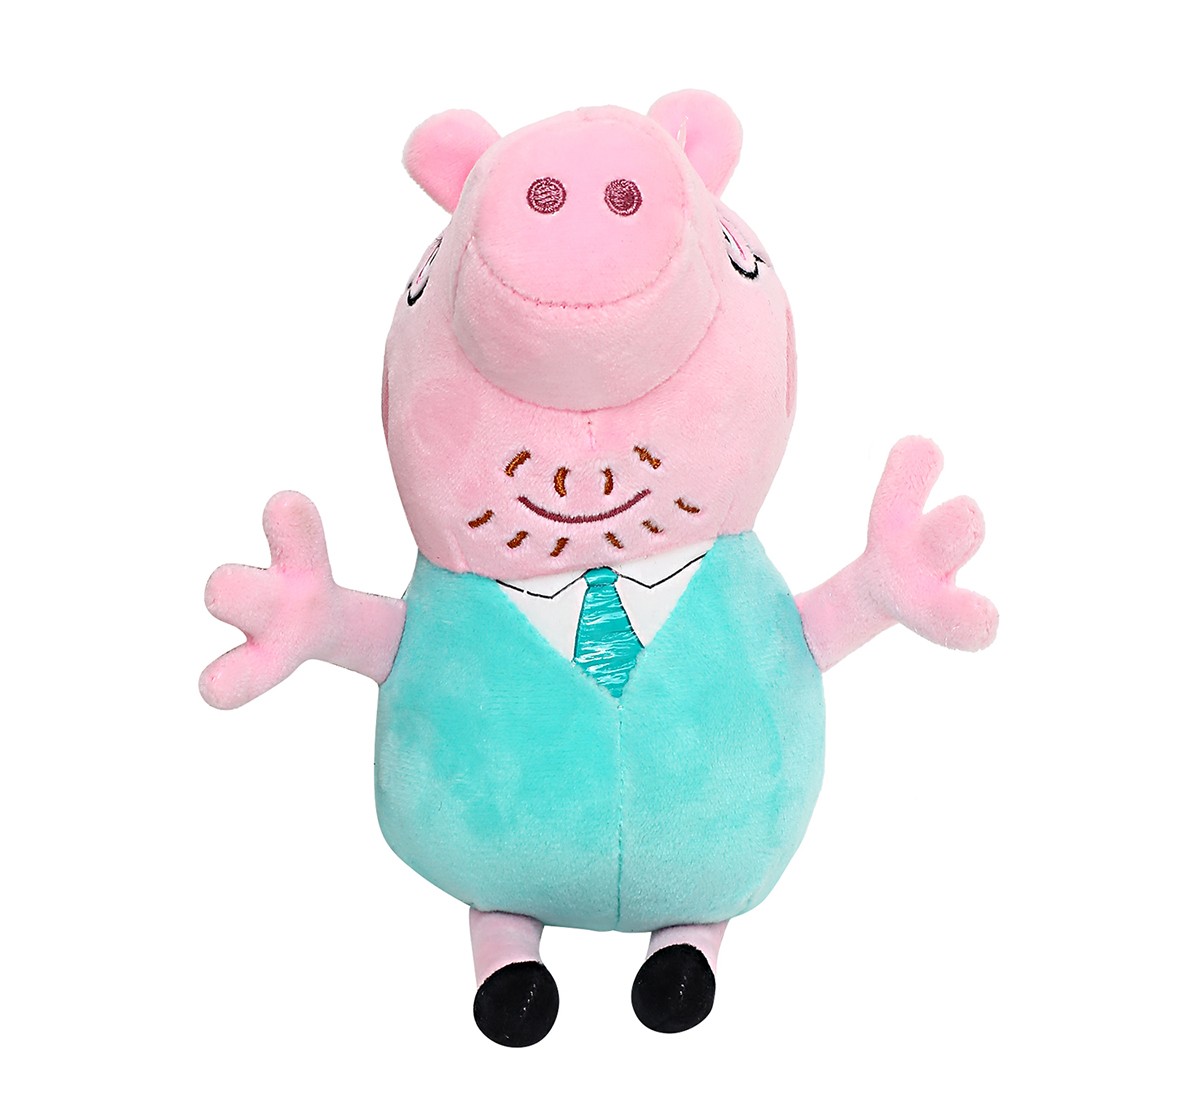 Peppa Pig Daddy 19 Cm Soft Toy for Kids age 3Y+ (Pink)